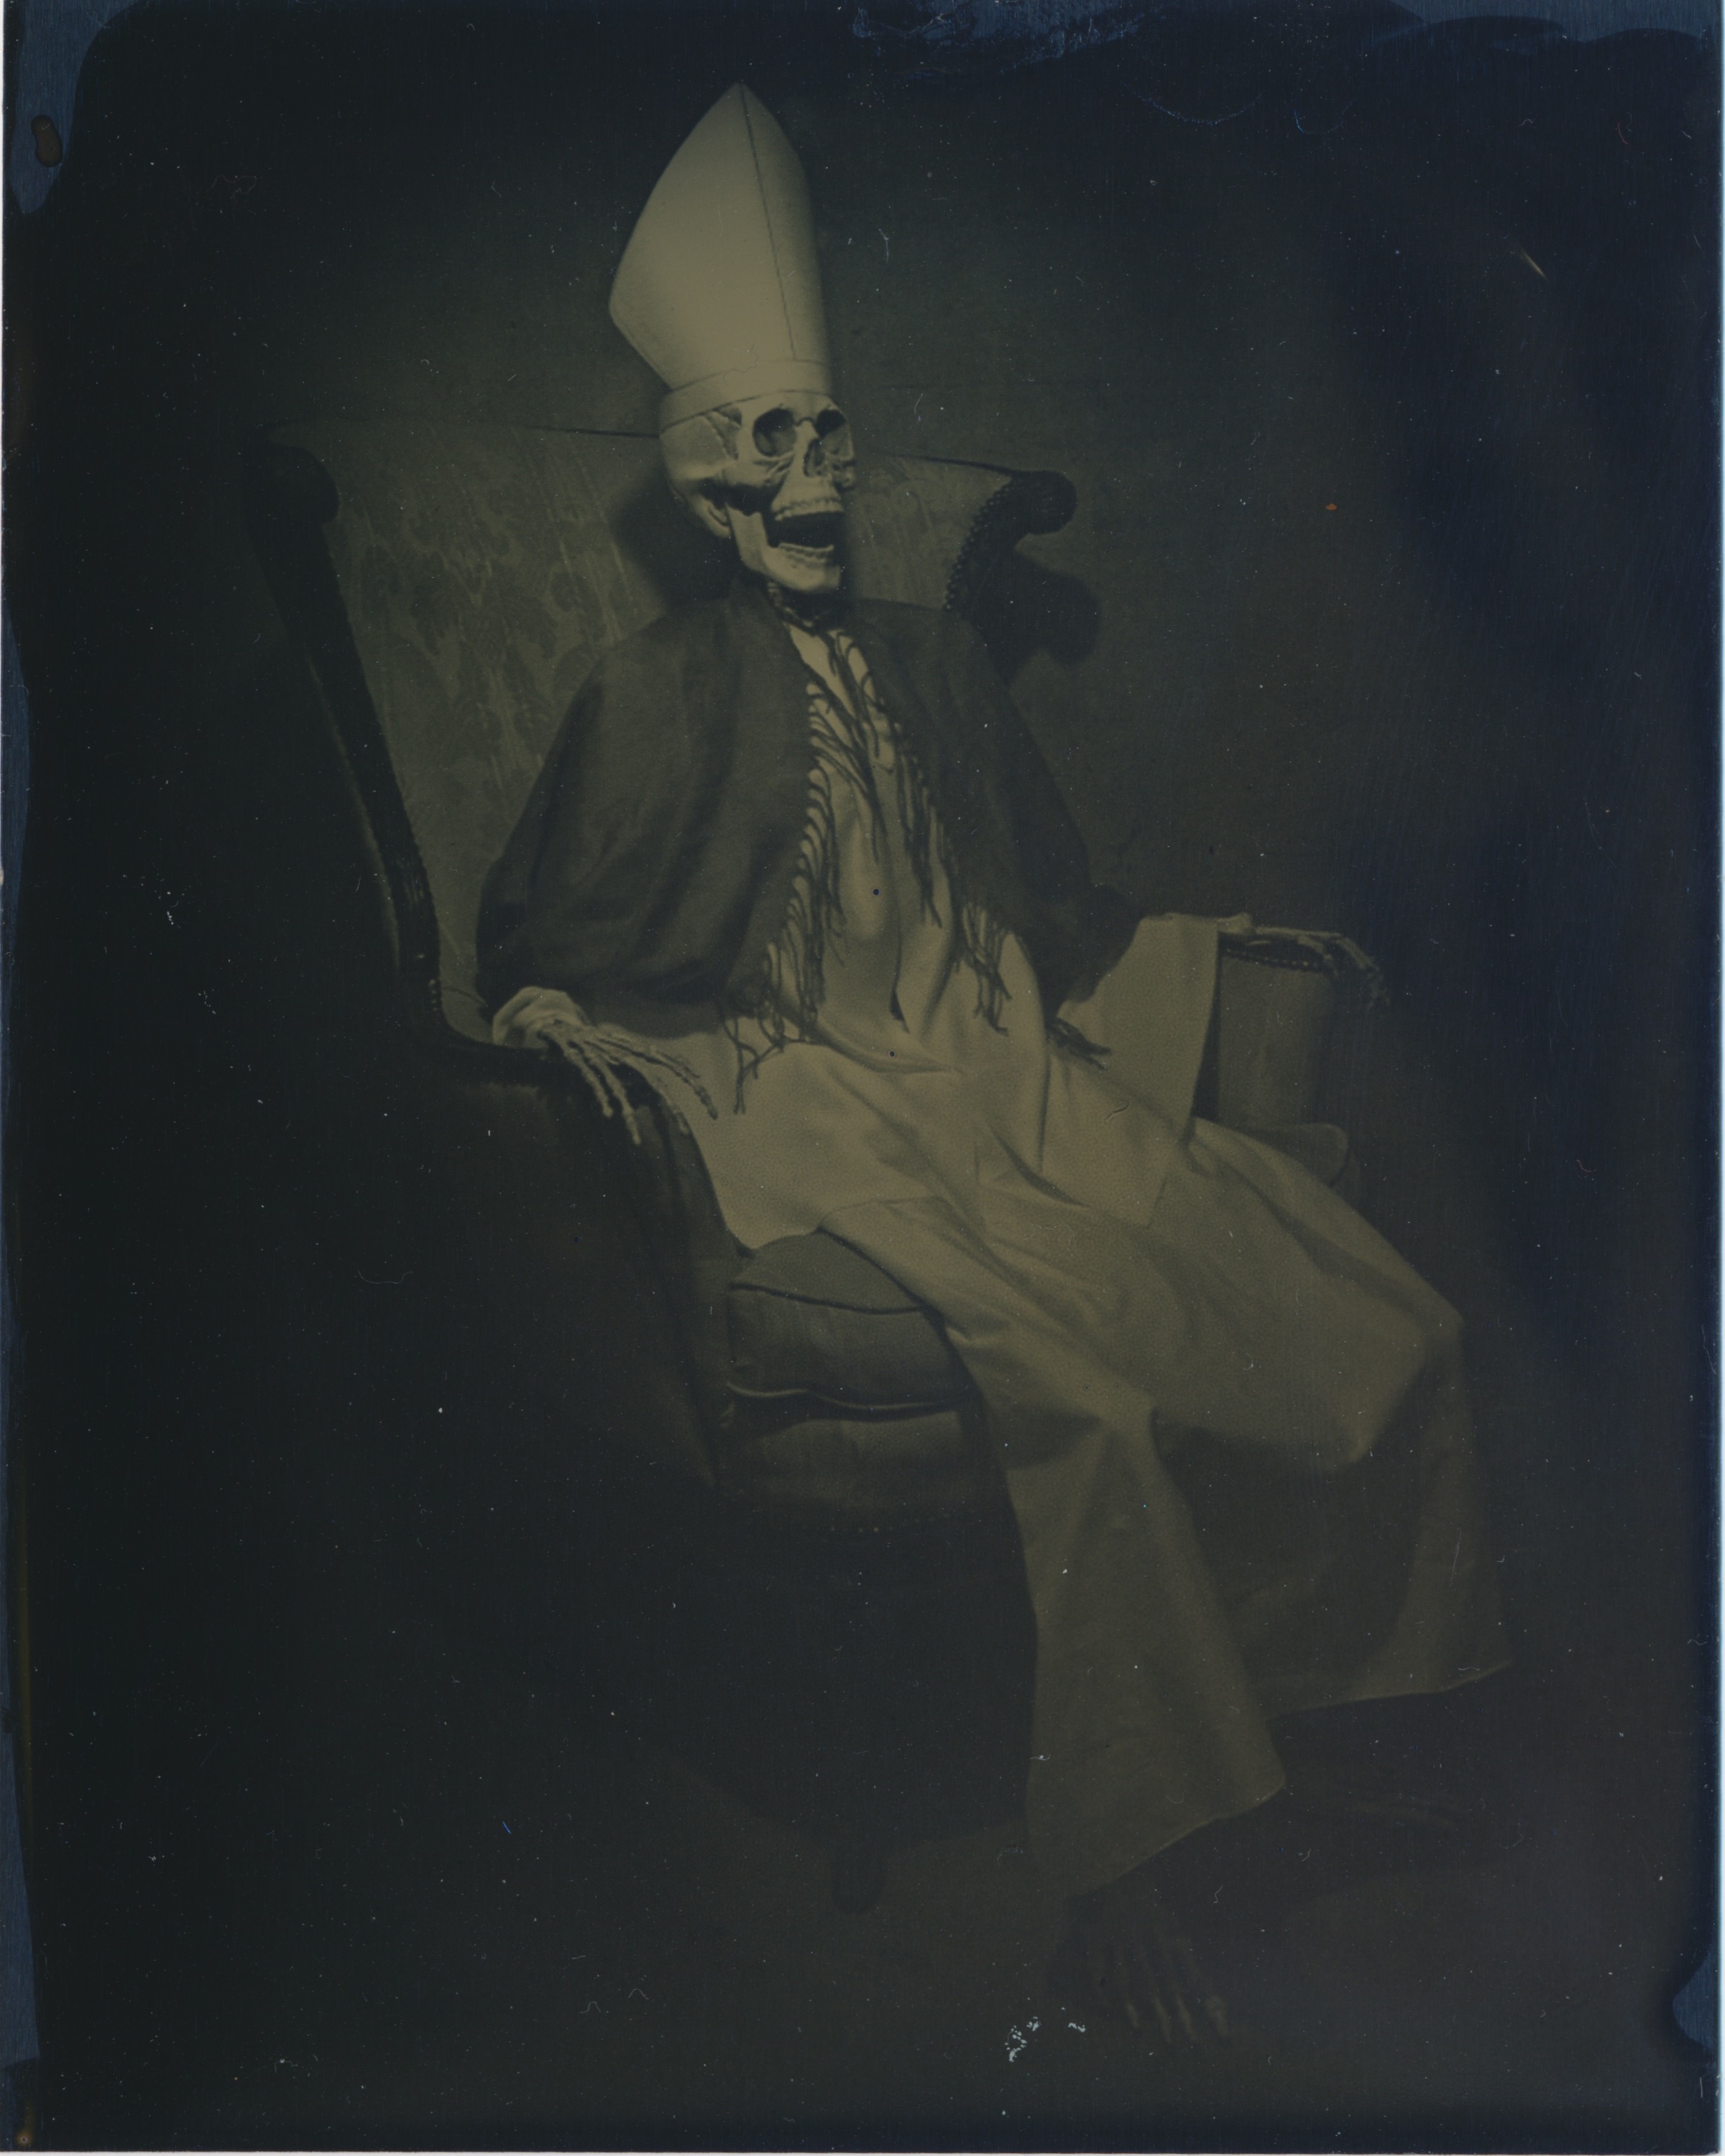   After Pope Innocent X   2015  Tintype  4x5 